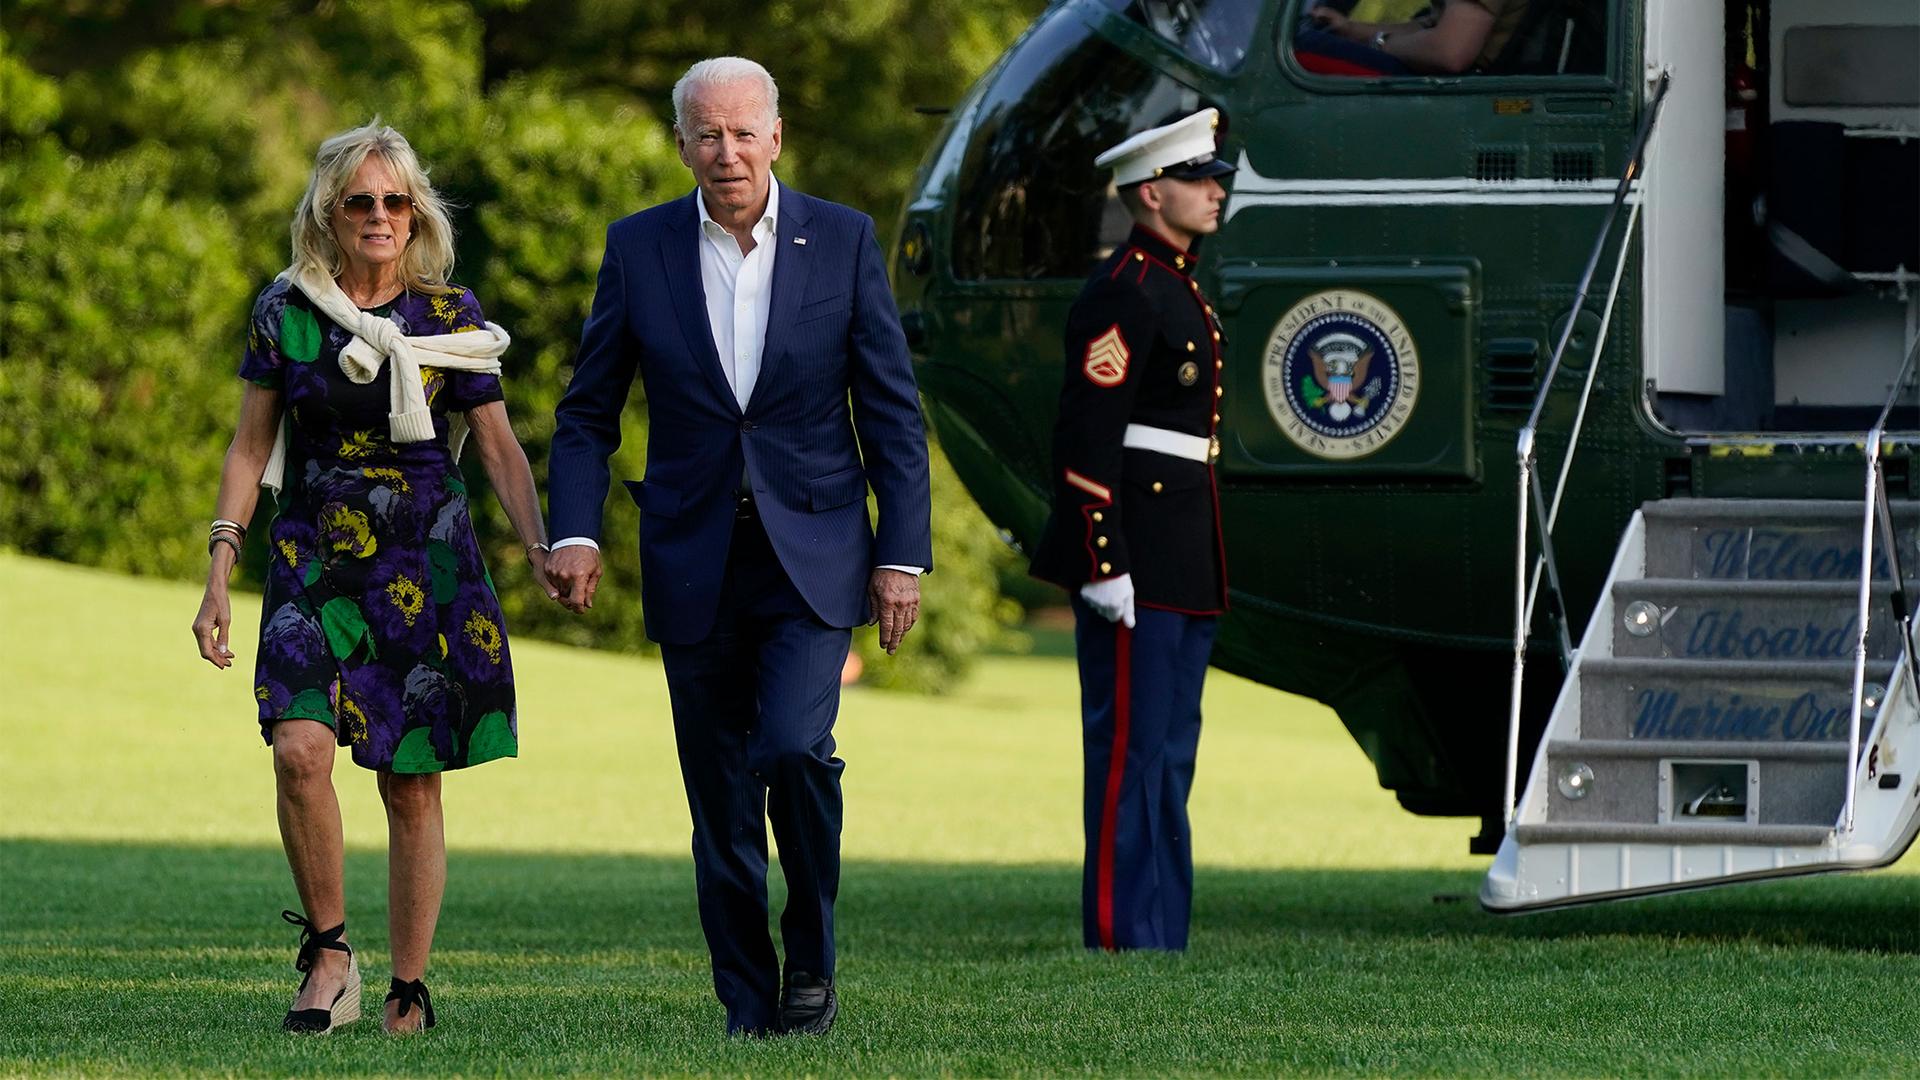 President Biden in a blue suit and First Lady Jill Biden in a purple, green, yellow and black dress walk past Marine One